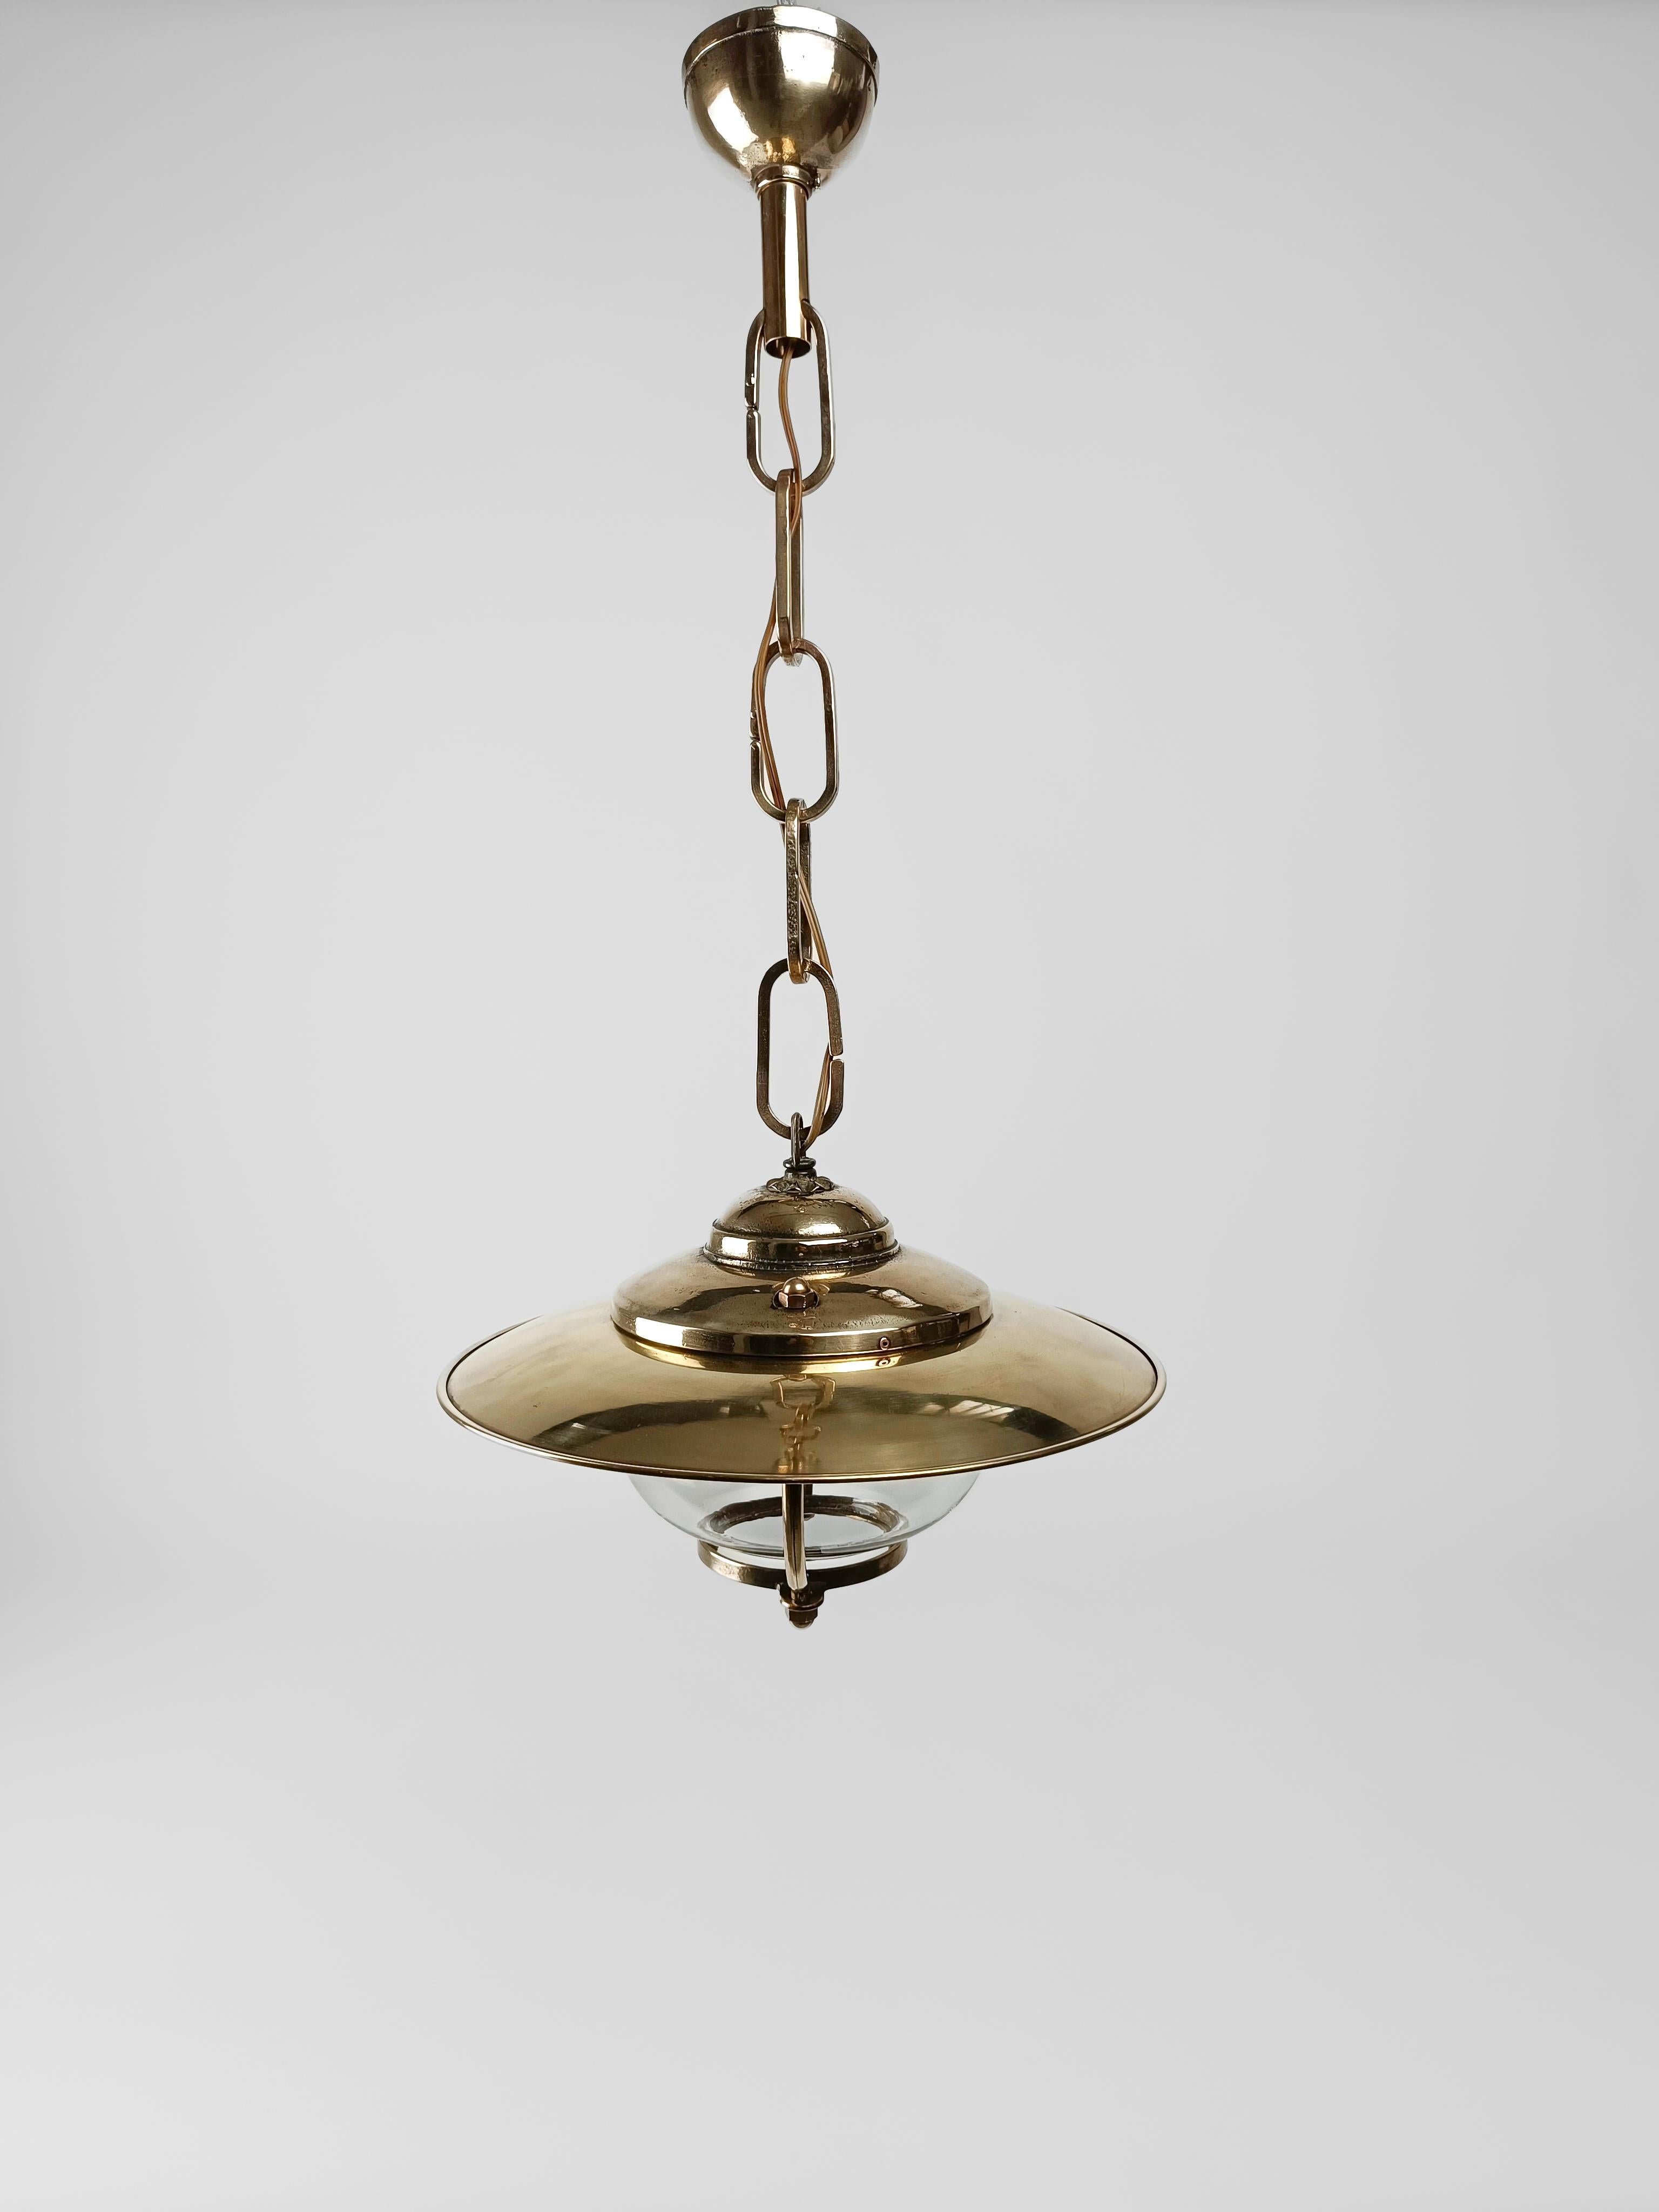 Italian Mid-20th Century Brass Pendant Lamp or Lantern in Nautical Style  For Sale 6